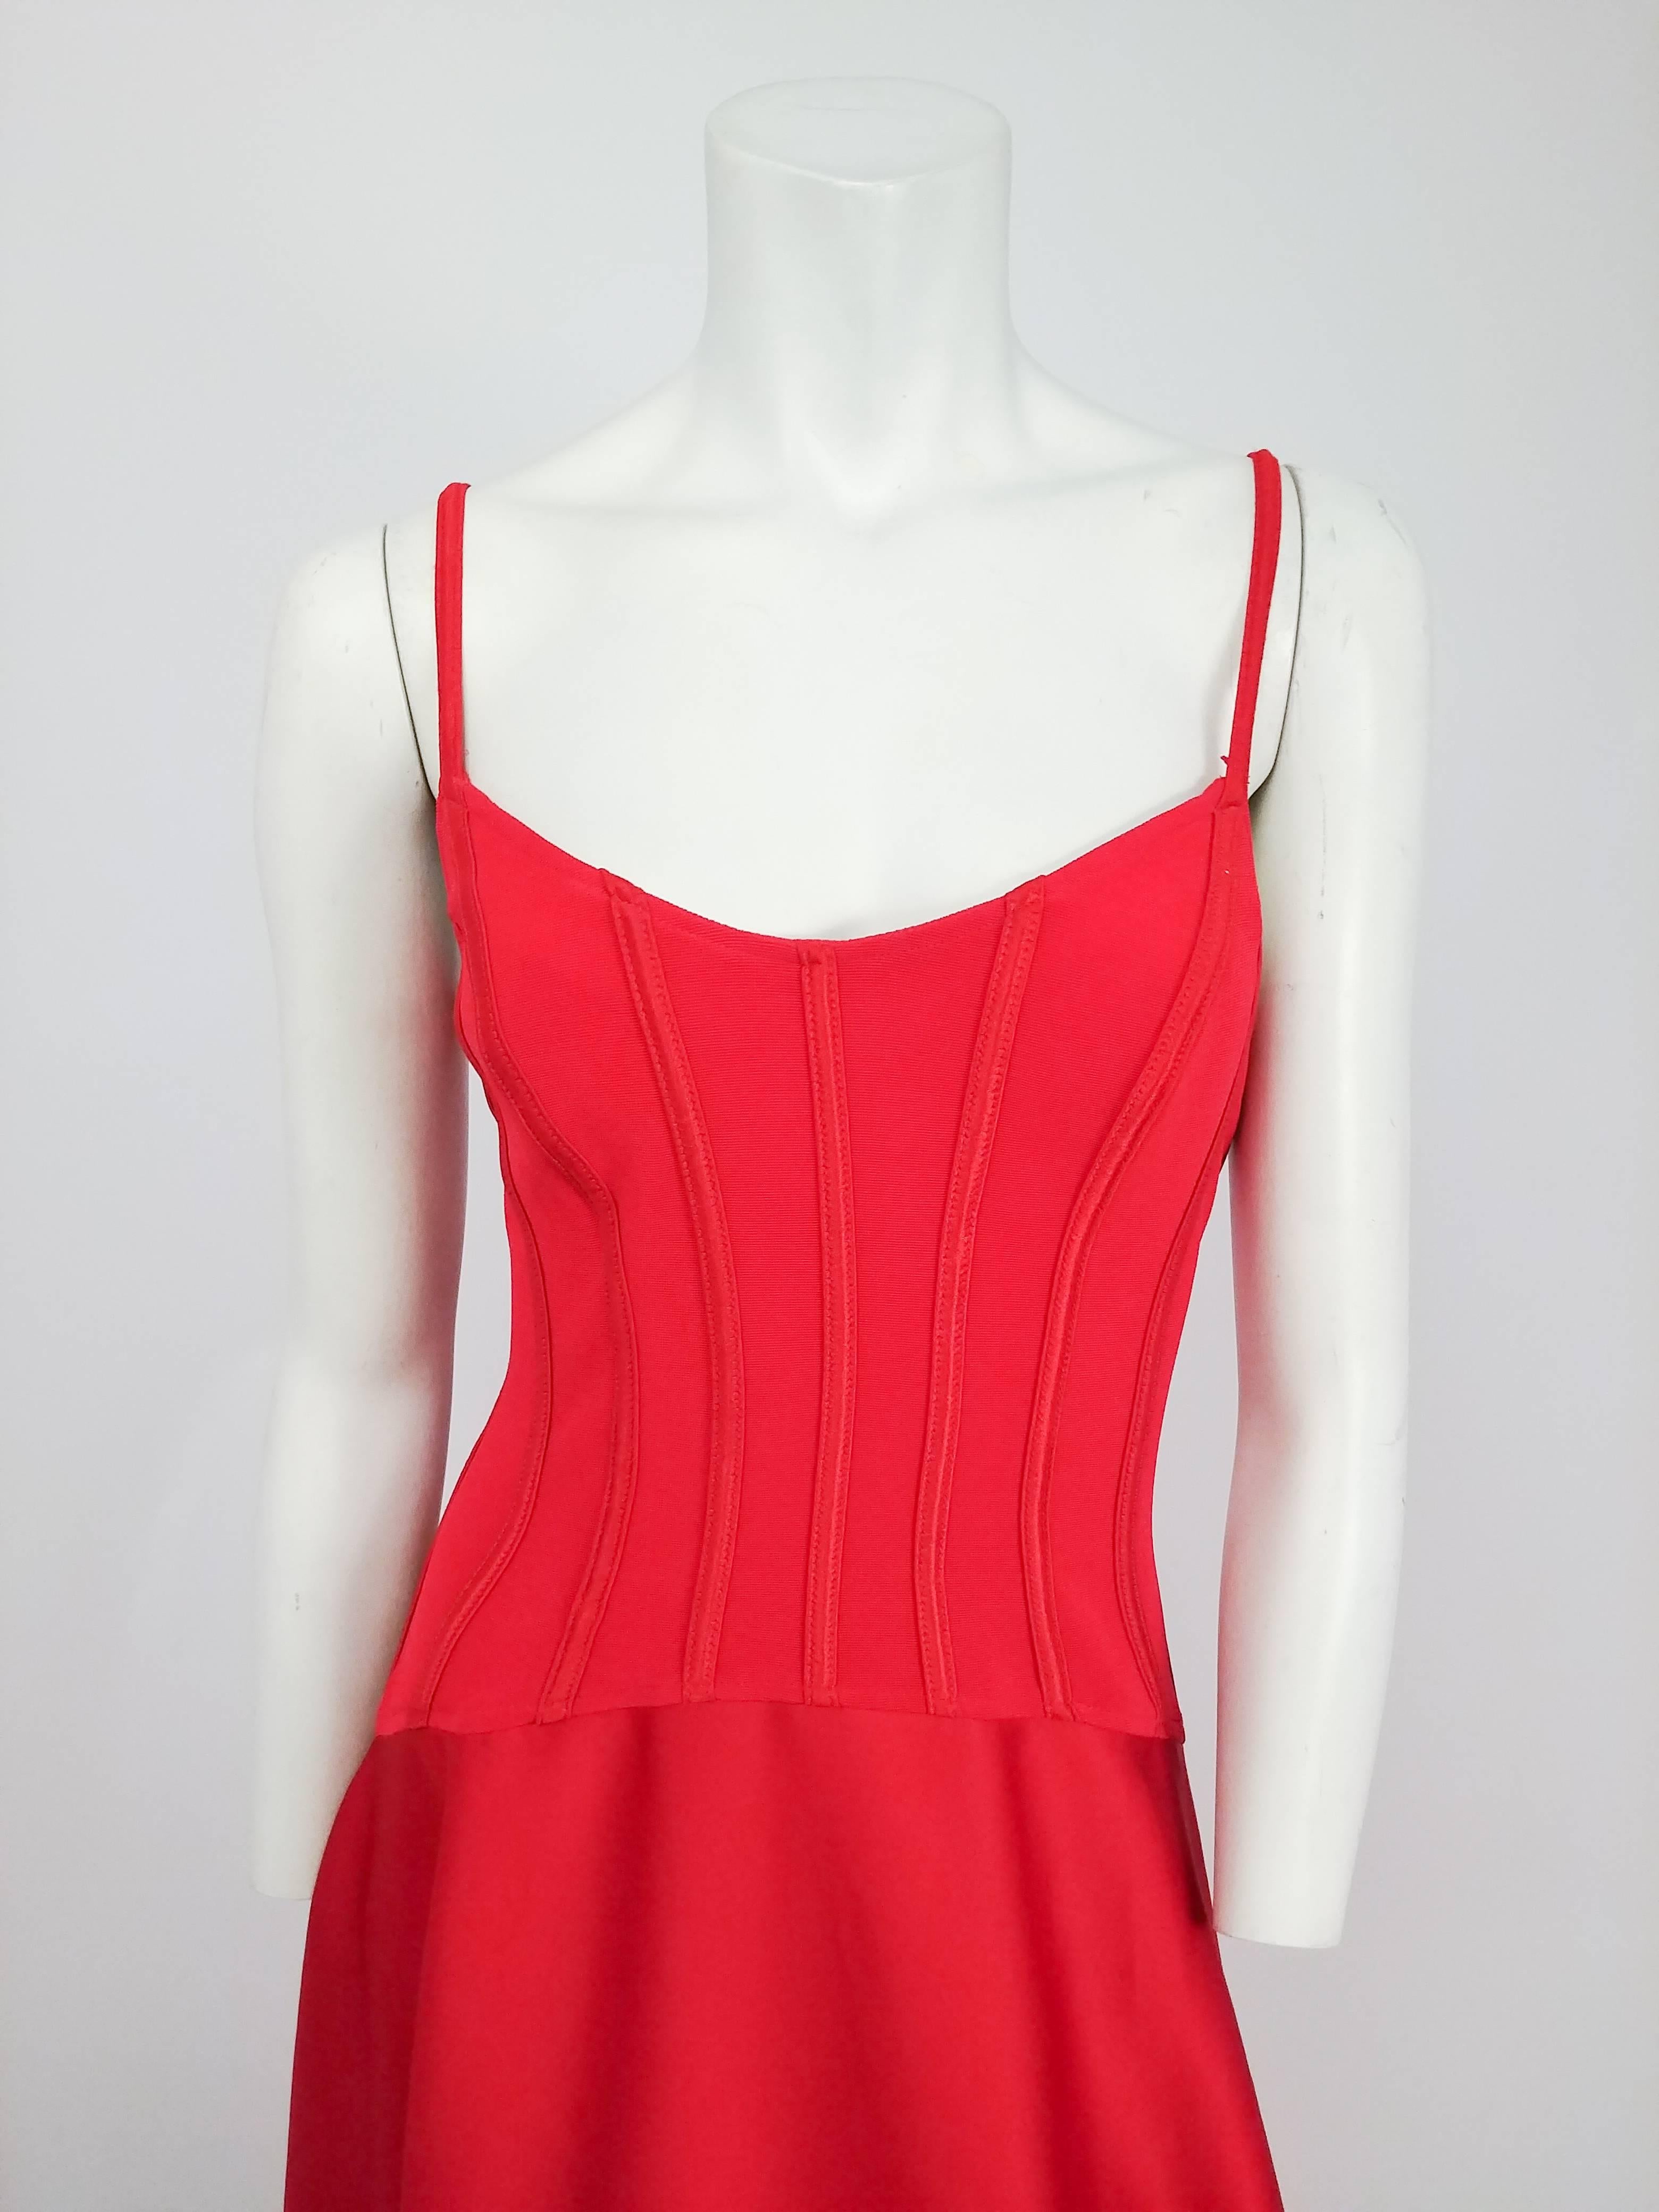 1990s Tadashi Red Corset Top Evening Gown. Stretch jersey top with spaghetti straps. Faux boning topstiched on bodice. Long A-ling flared satin skirt.

Here are the measurements for this dress when it is not stretched at all (there is a bit of